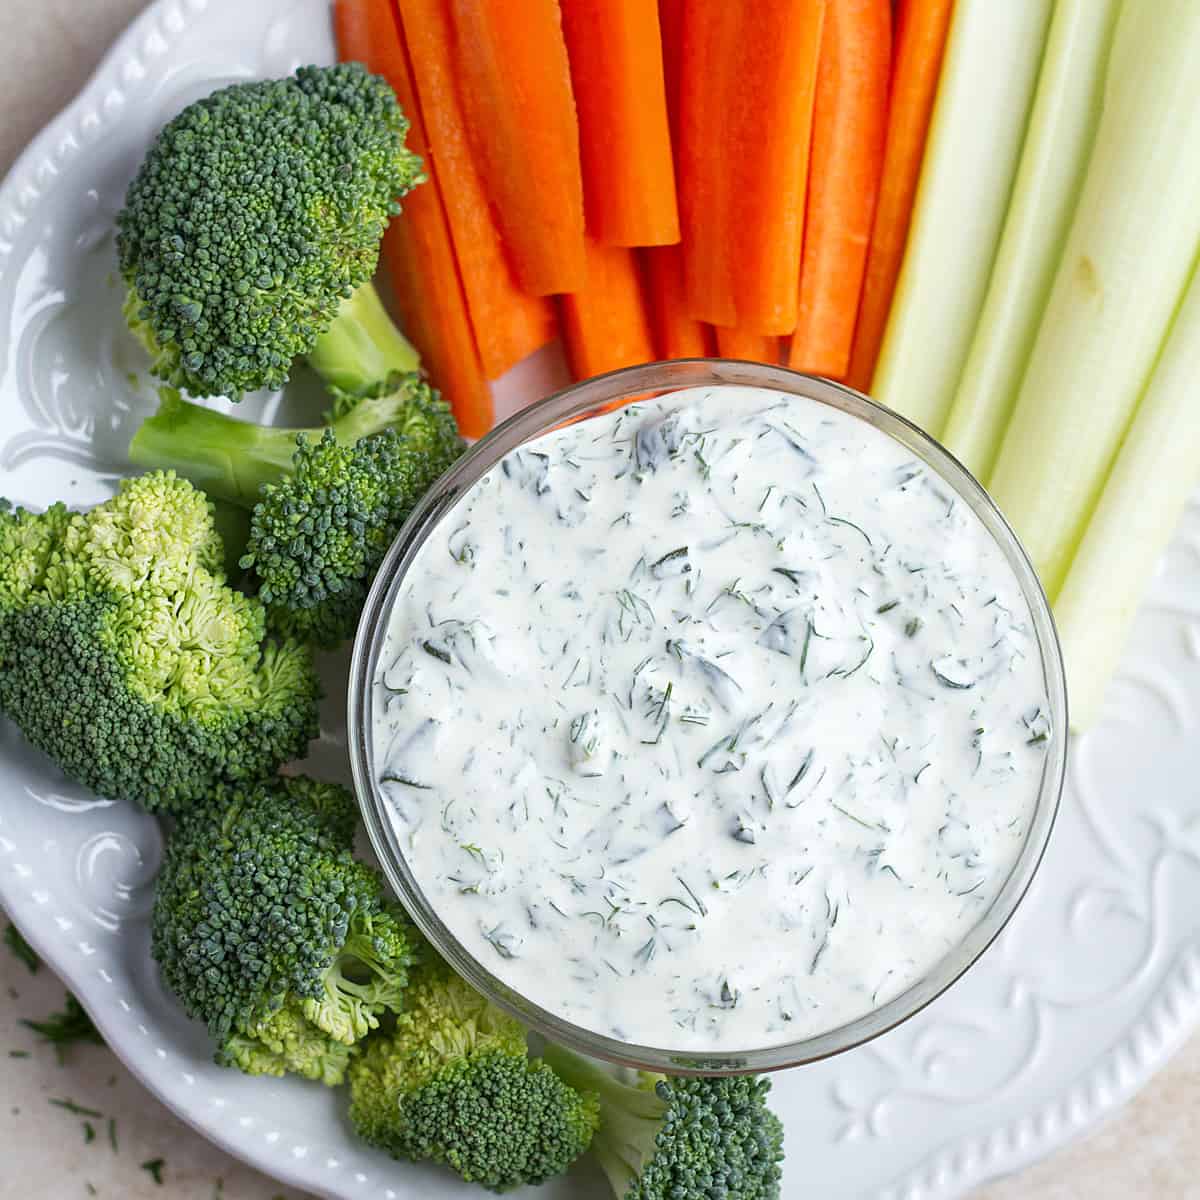 Appetizer dill dip with veggies.